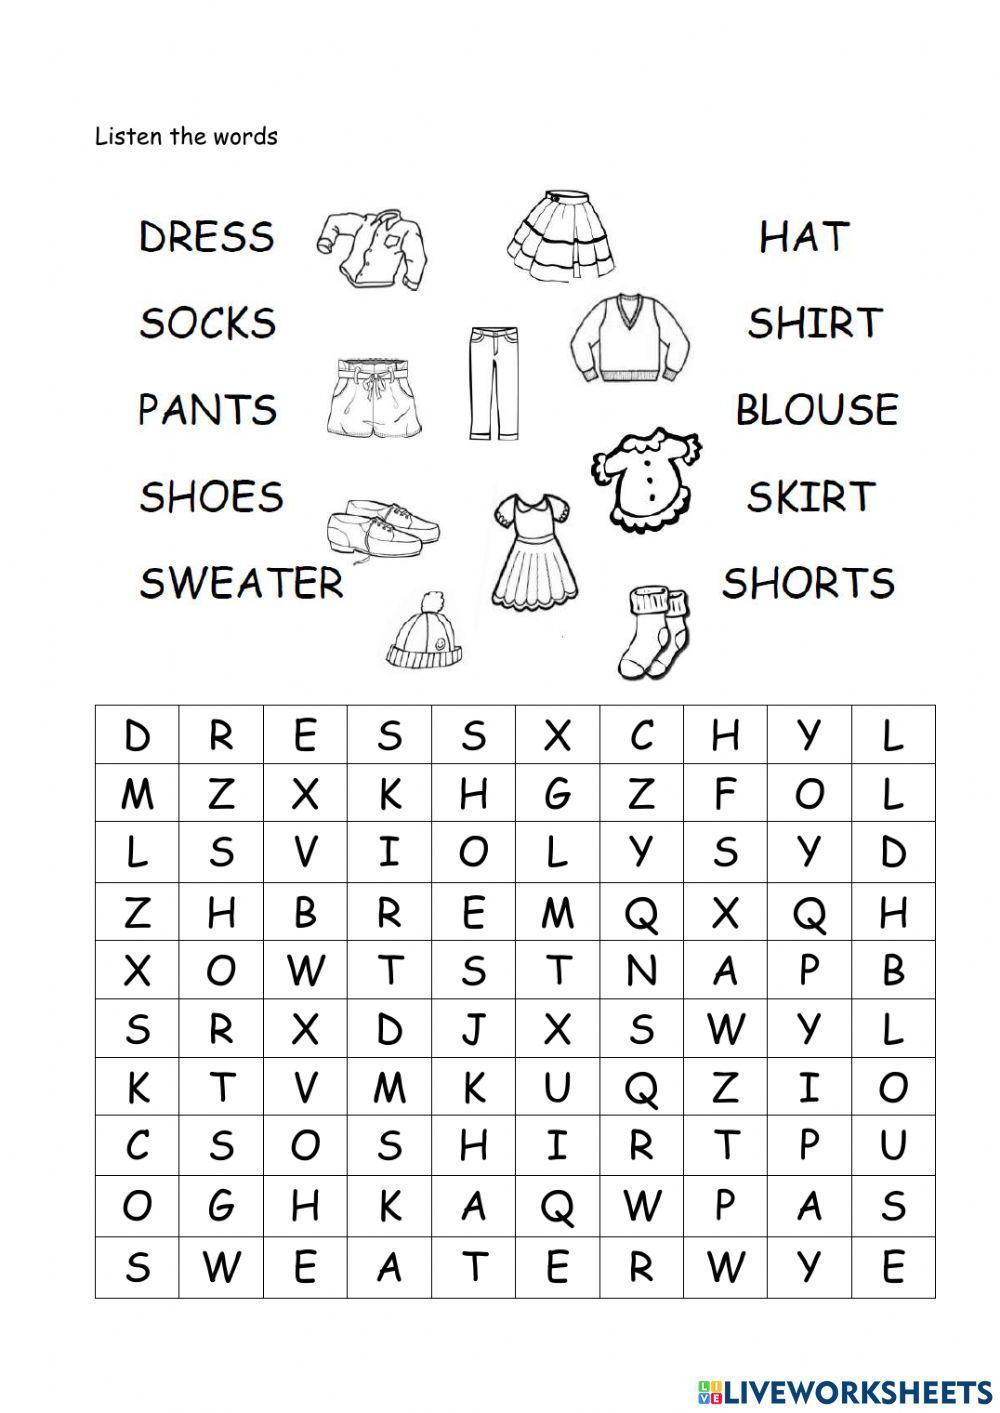 Clothes' wordsearch